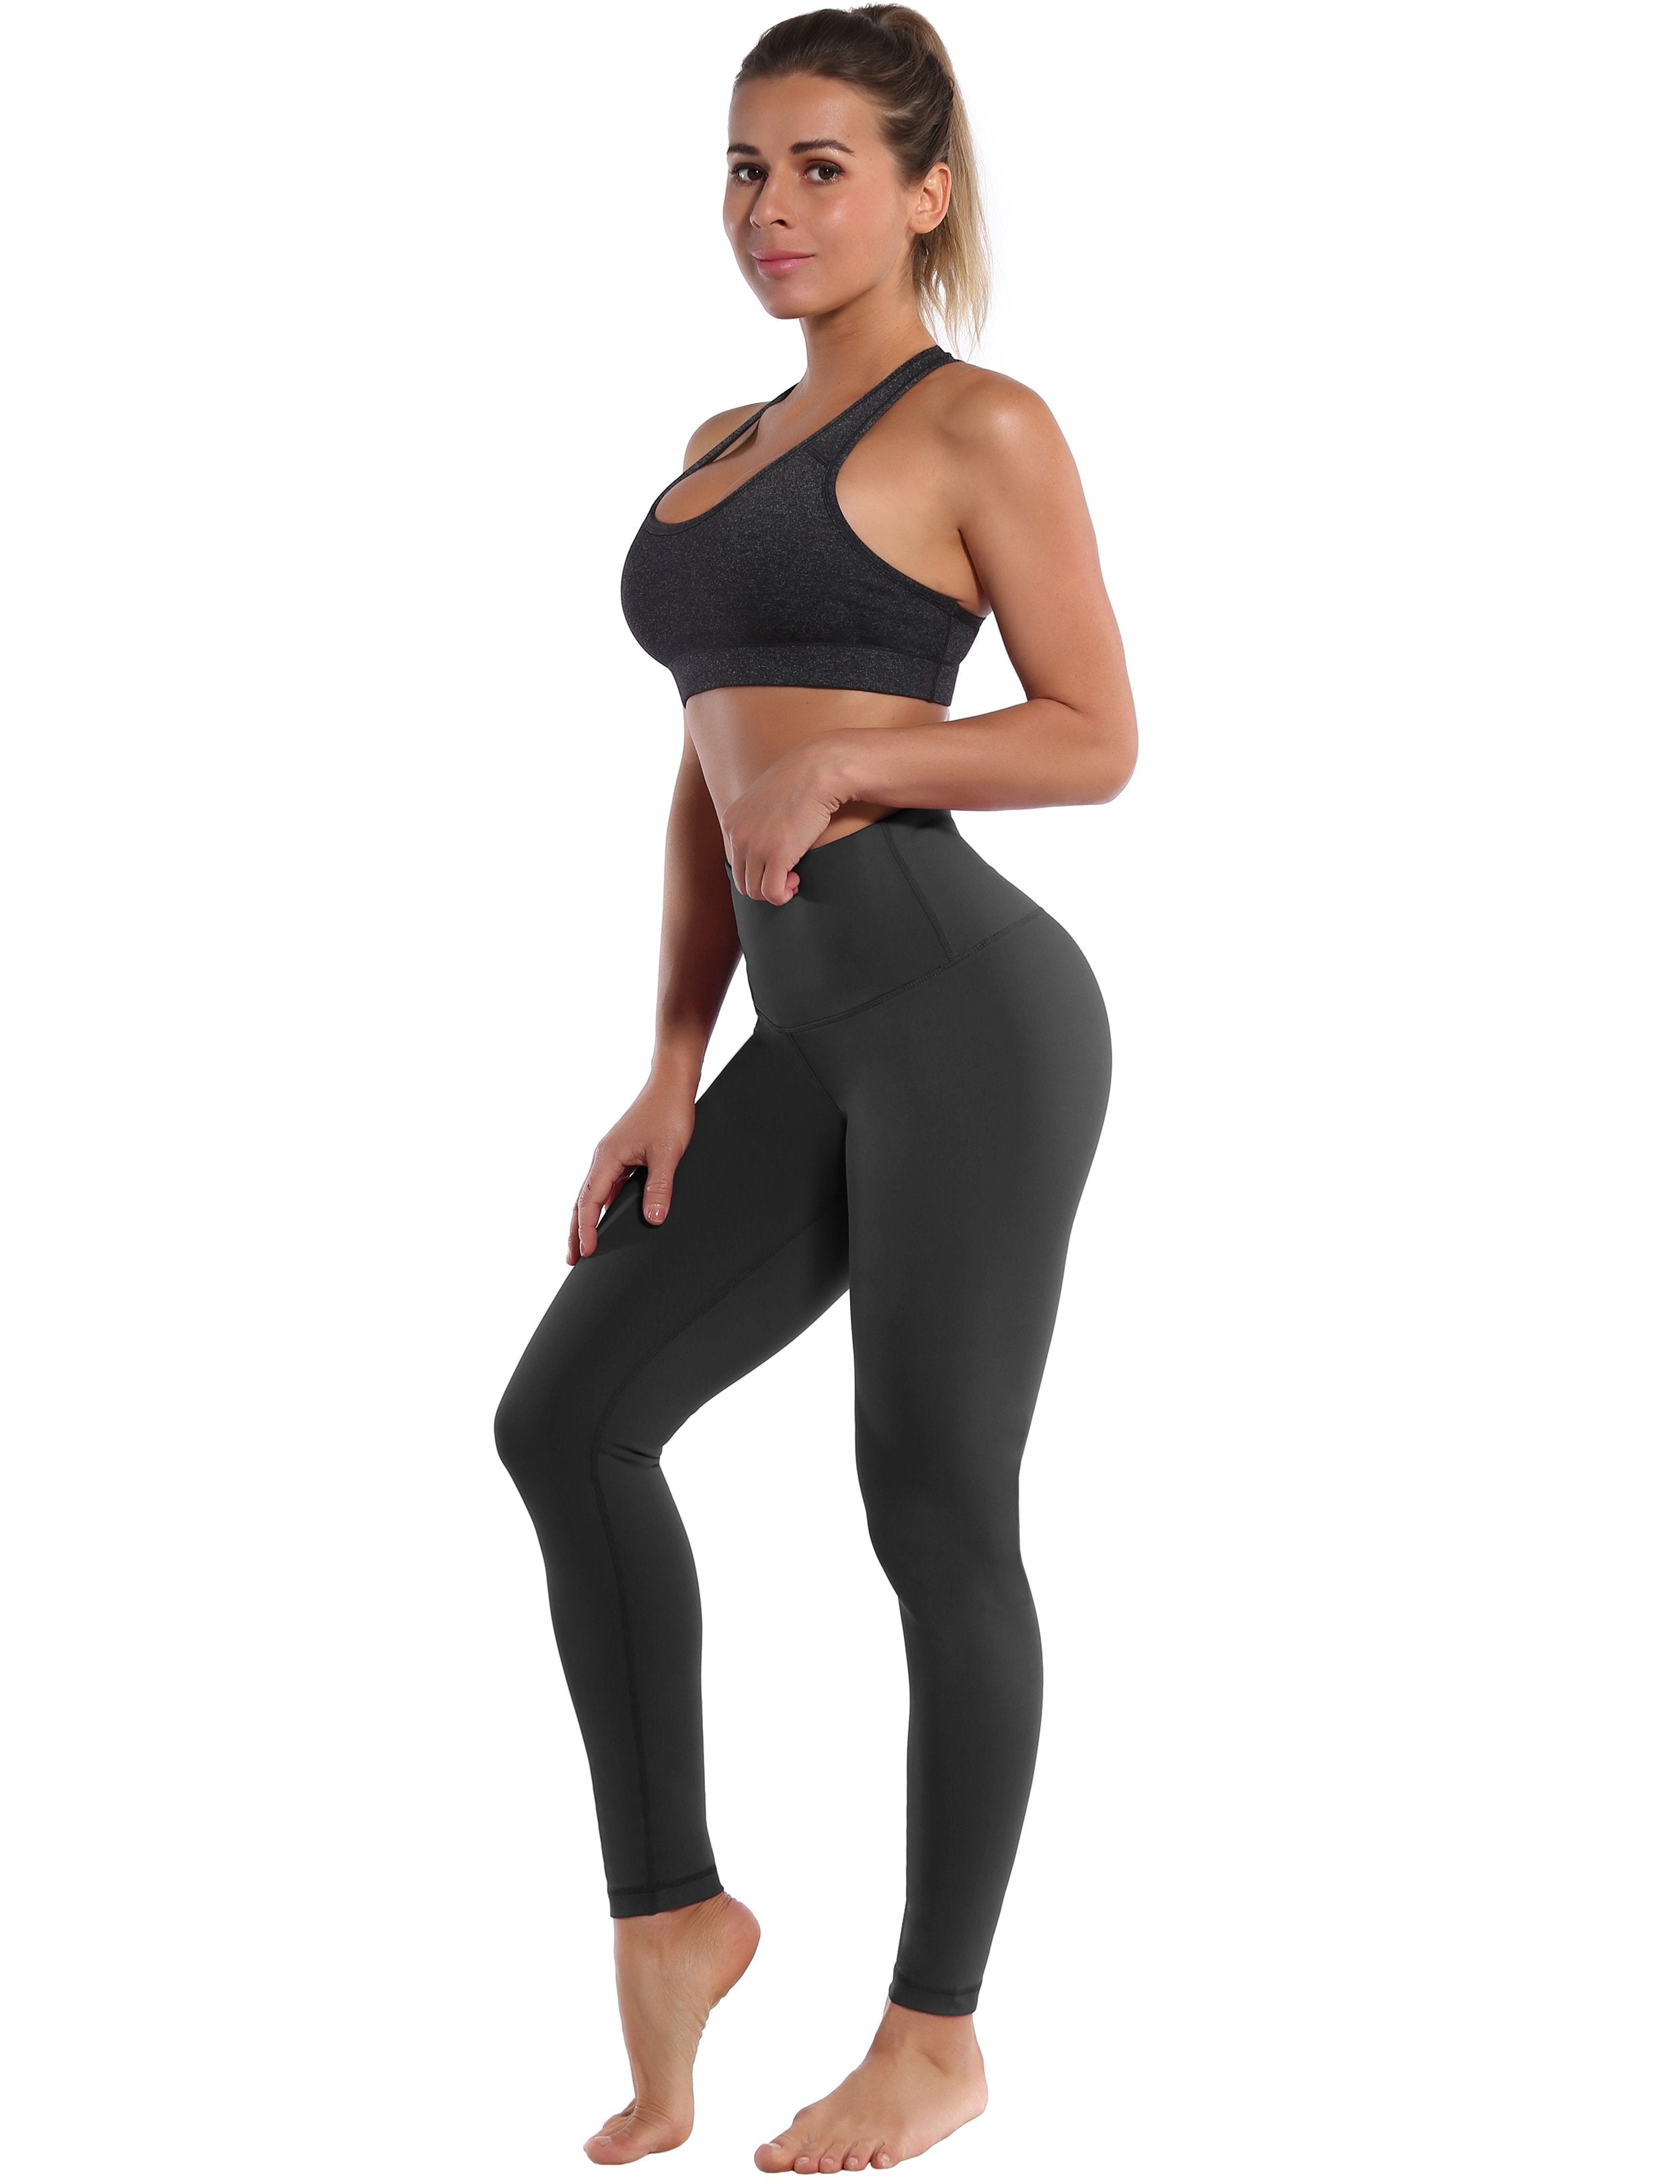 High Waist Running Pants shadowcharcoal 75%Nylon/25%Spandex Fabric doesn't attract lint easily 4-way stretch No see-through Moisture-wicking Tummy control Inner pocket Four lengths